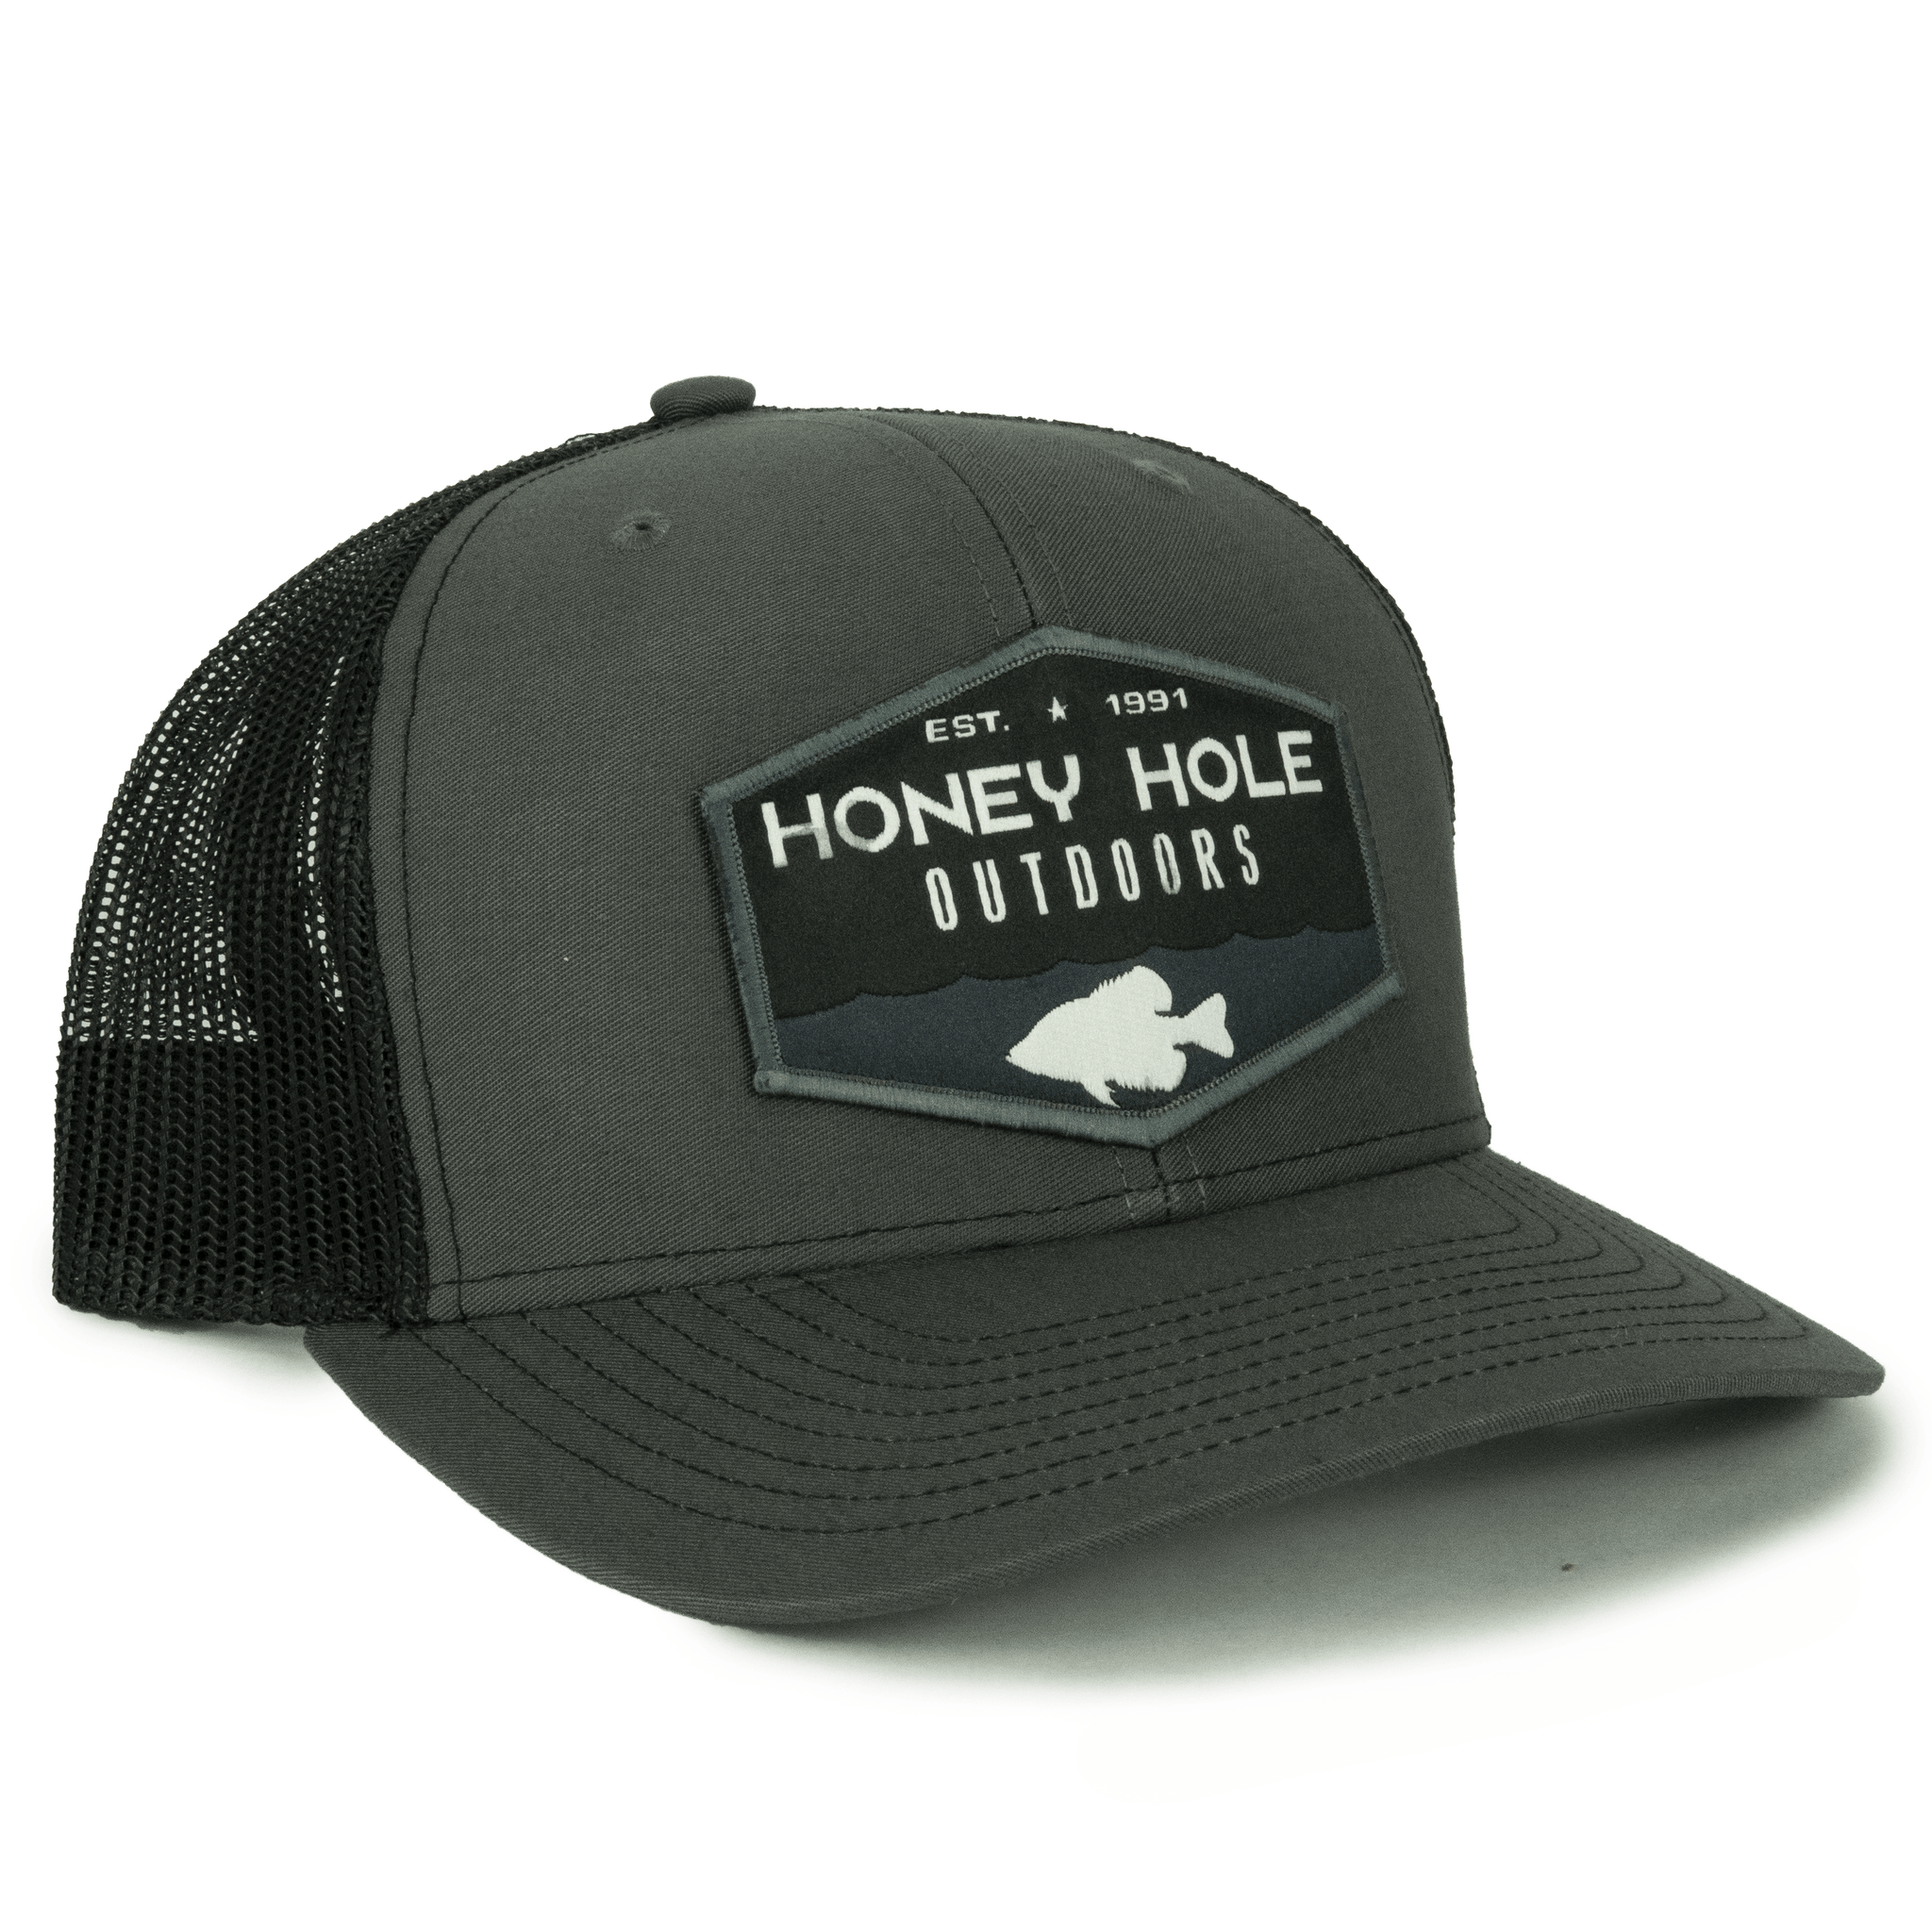 Honey Hole Outdoors Snapback - Black Crappie Hex - Charcoal/Black